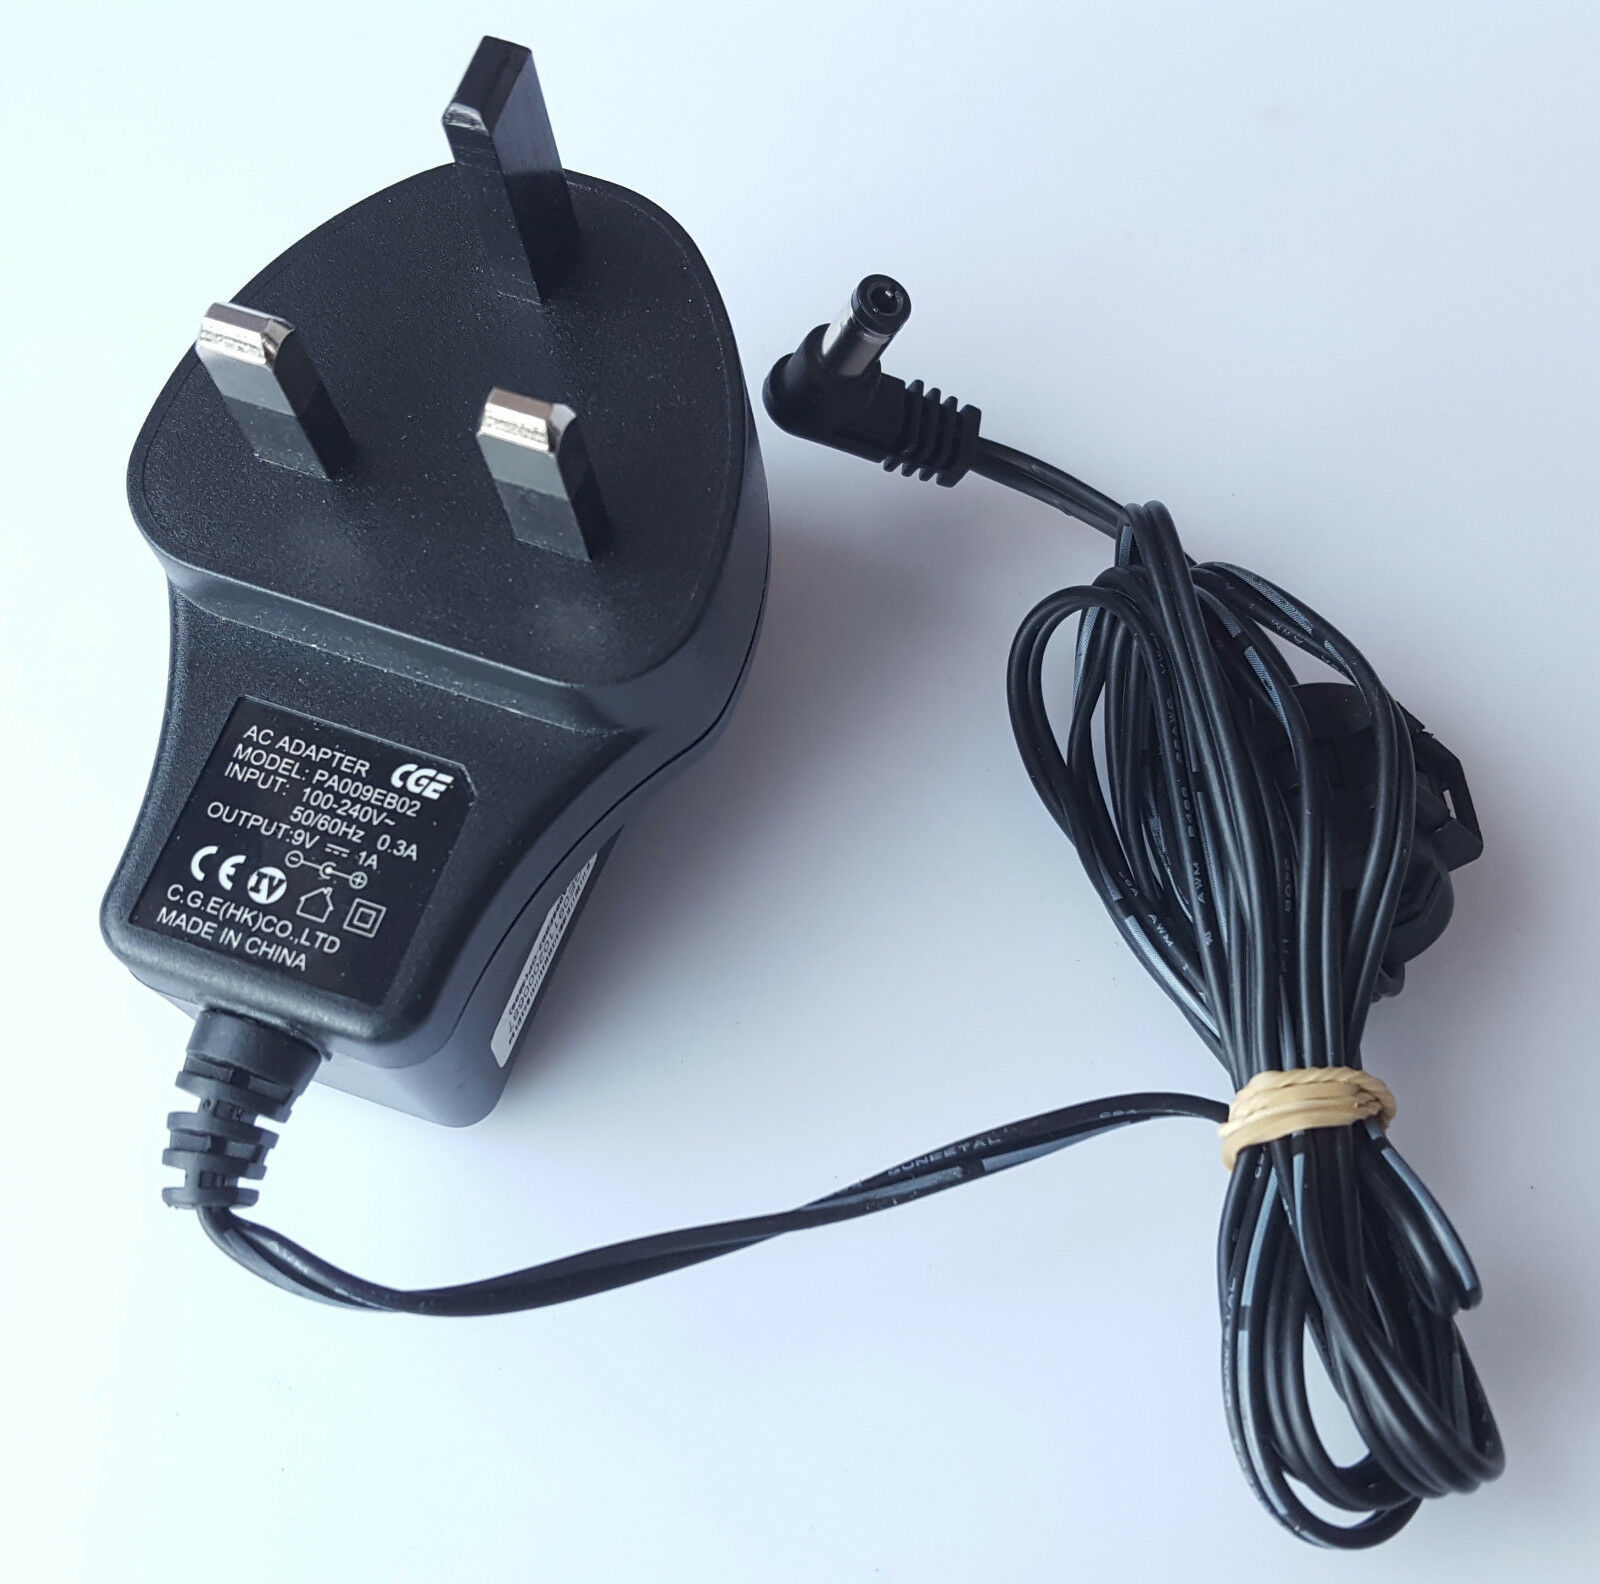 GENUINE CGE PA009EB02 AC/DC POWER SUPPLY ADAPTER 9V 1.0A UK PLUG Brand: CGE Output Current: 1.0A Type: AC & DC Co